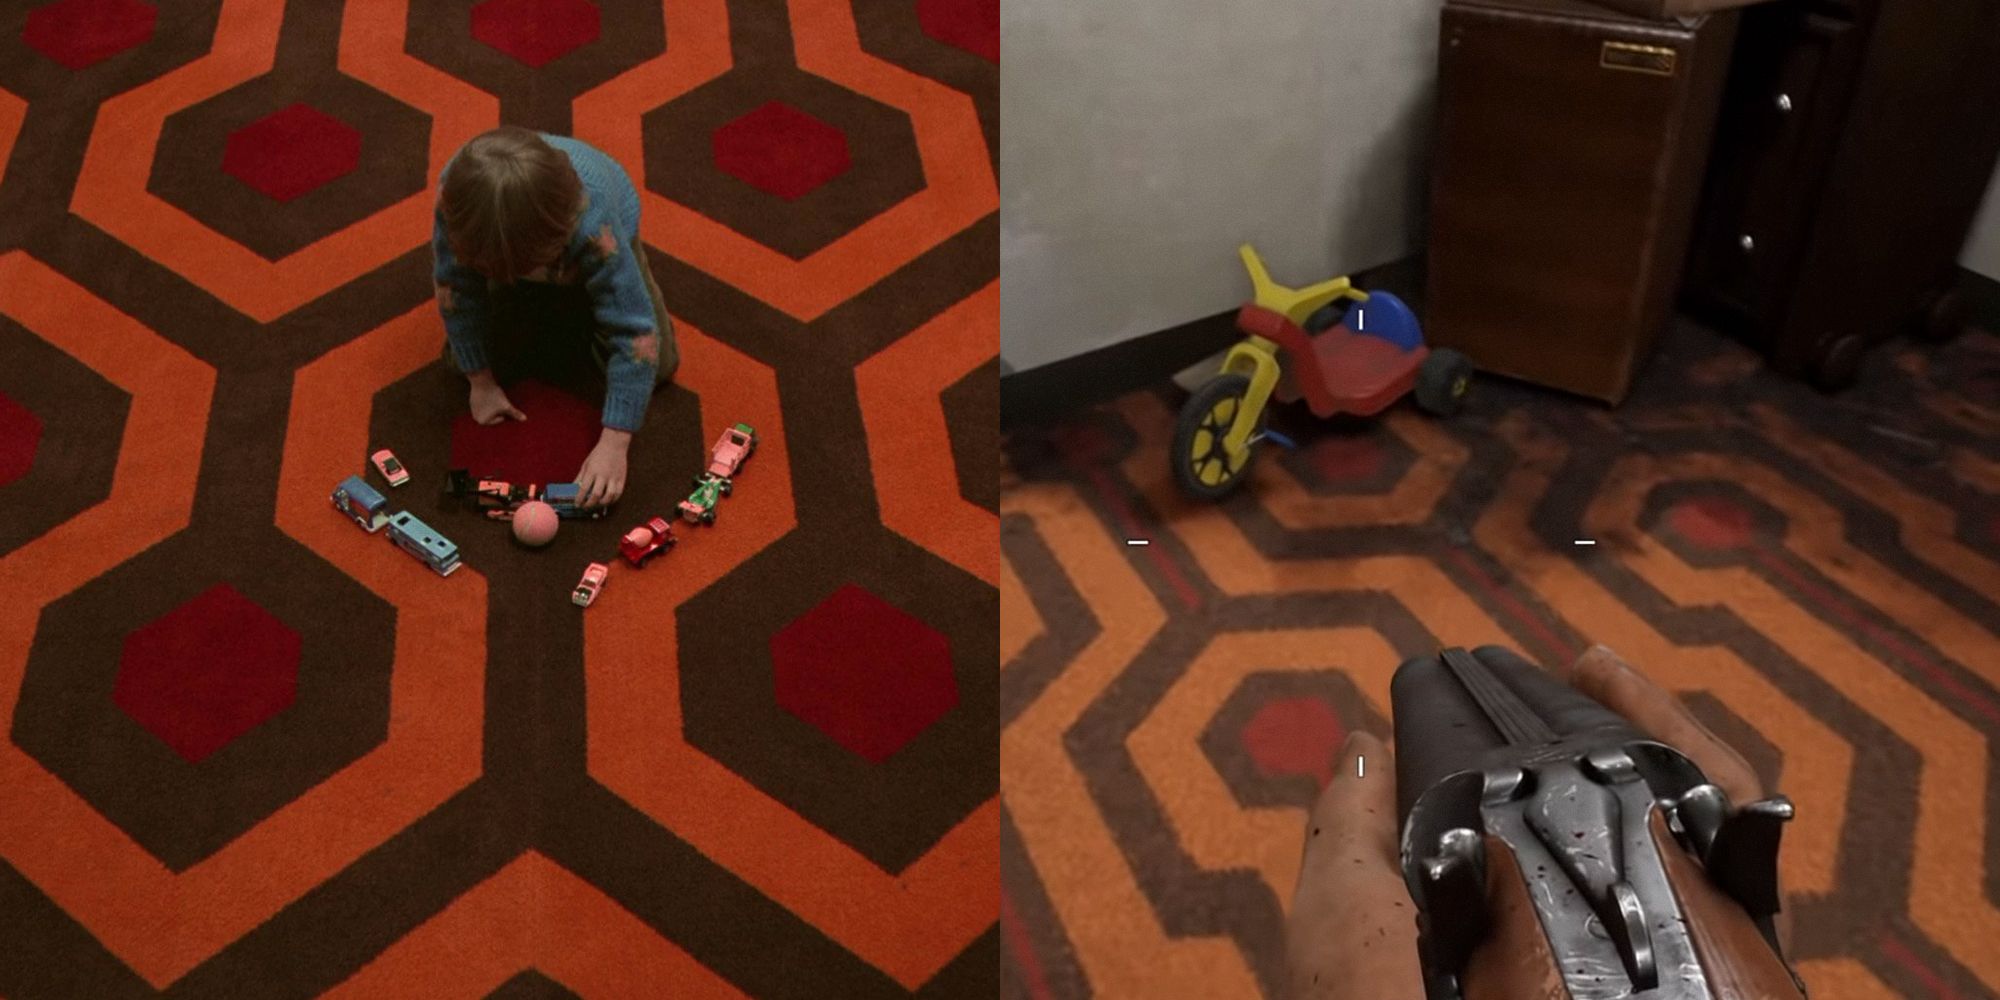 Split image with two photos. The left is of Danny on the carpet from the film The Shining. The right is the same carpet in the game Back 4 Blood.